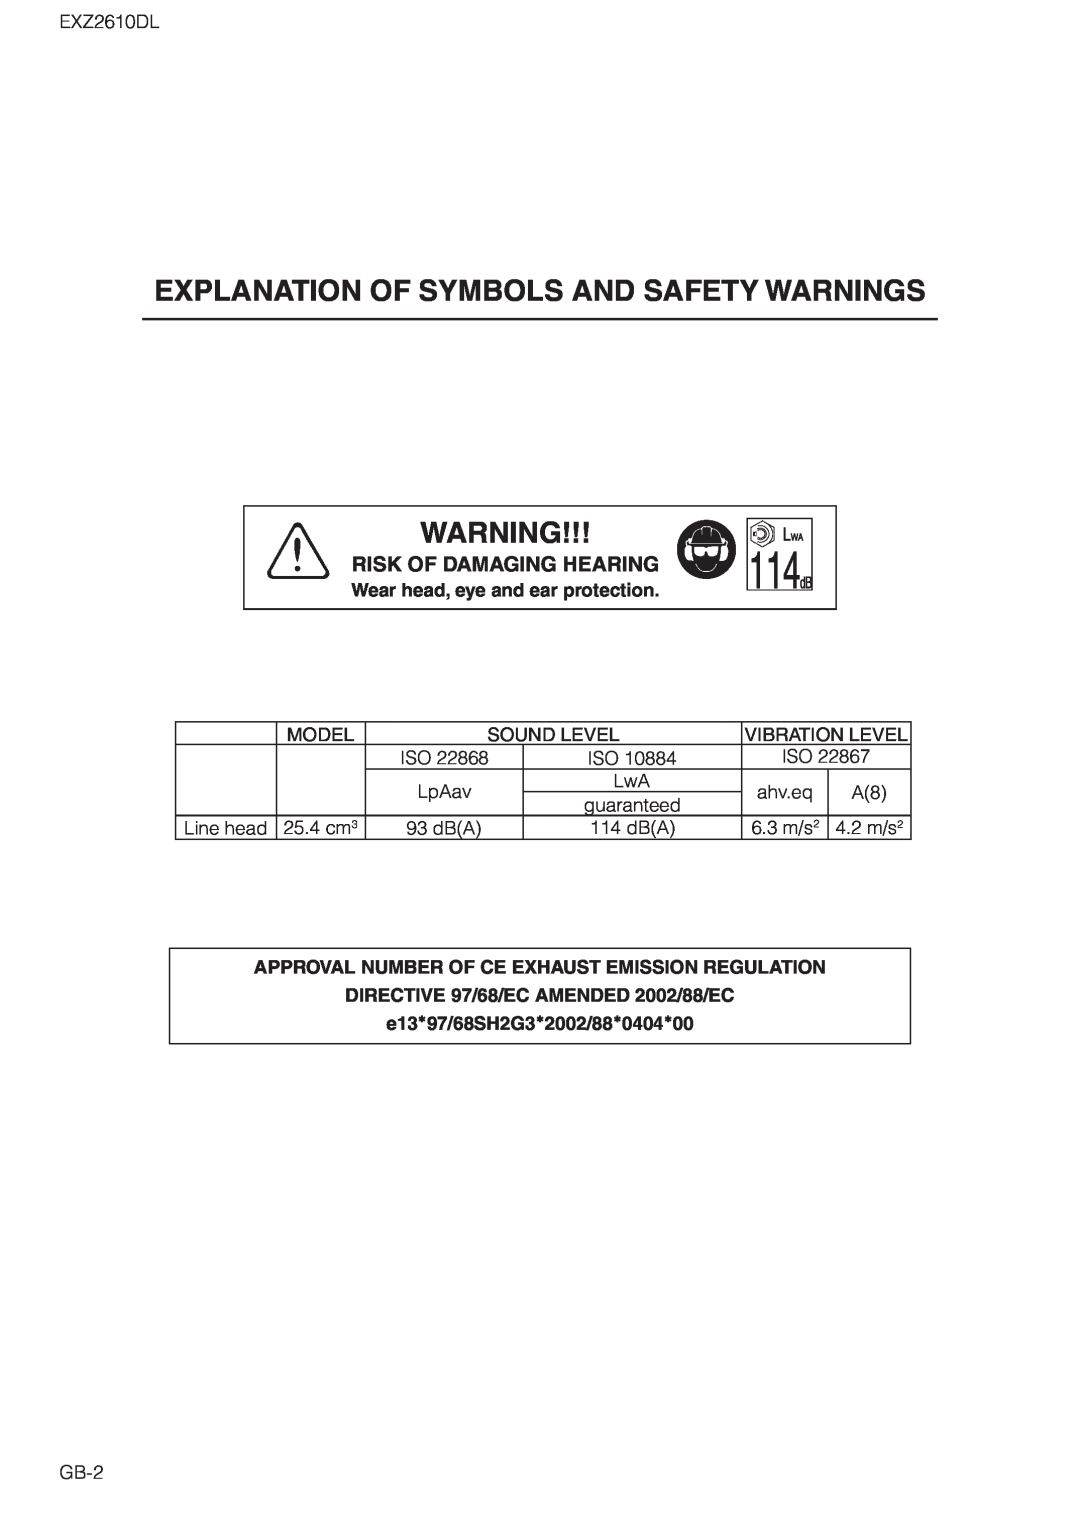 Zenoah EXZ2610DL Explanation Of Symbols And Safety Warnings, Risk Of Damaging Hearing, Wear head, eye and ear protection 